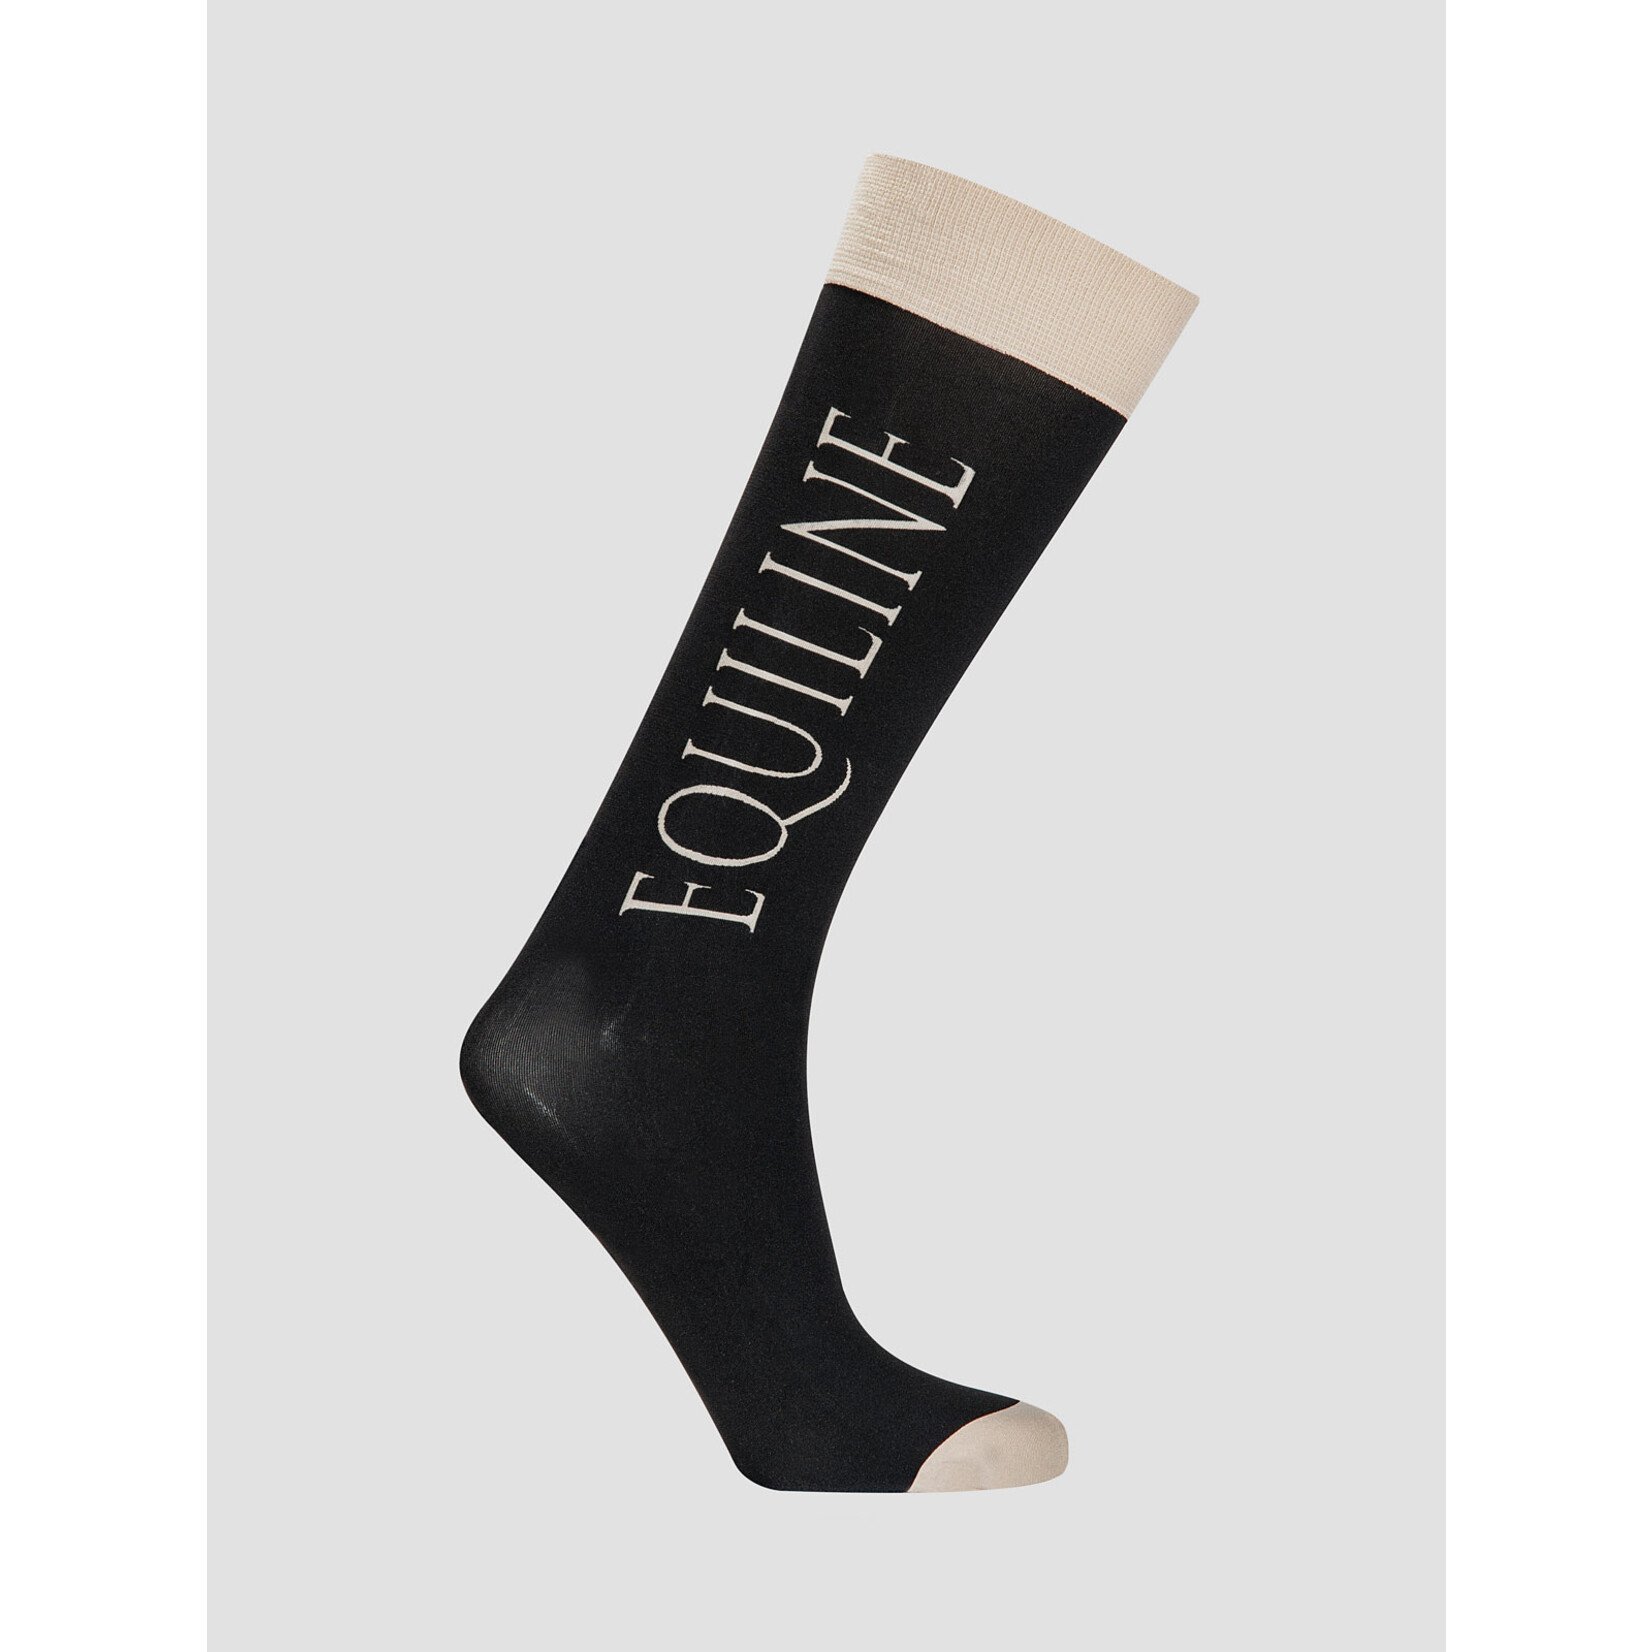 Equiline Equiline Softly Socks, Ultra-thin Microfibre socks, 3 pairs per pack, Black, One size